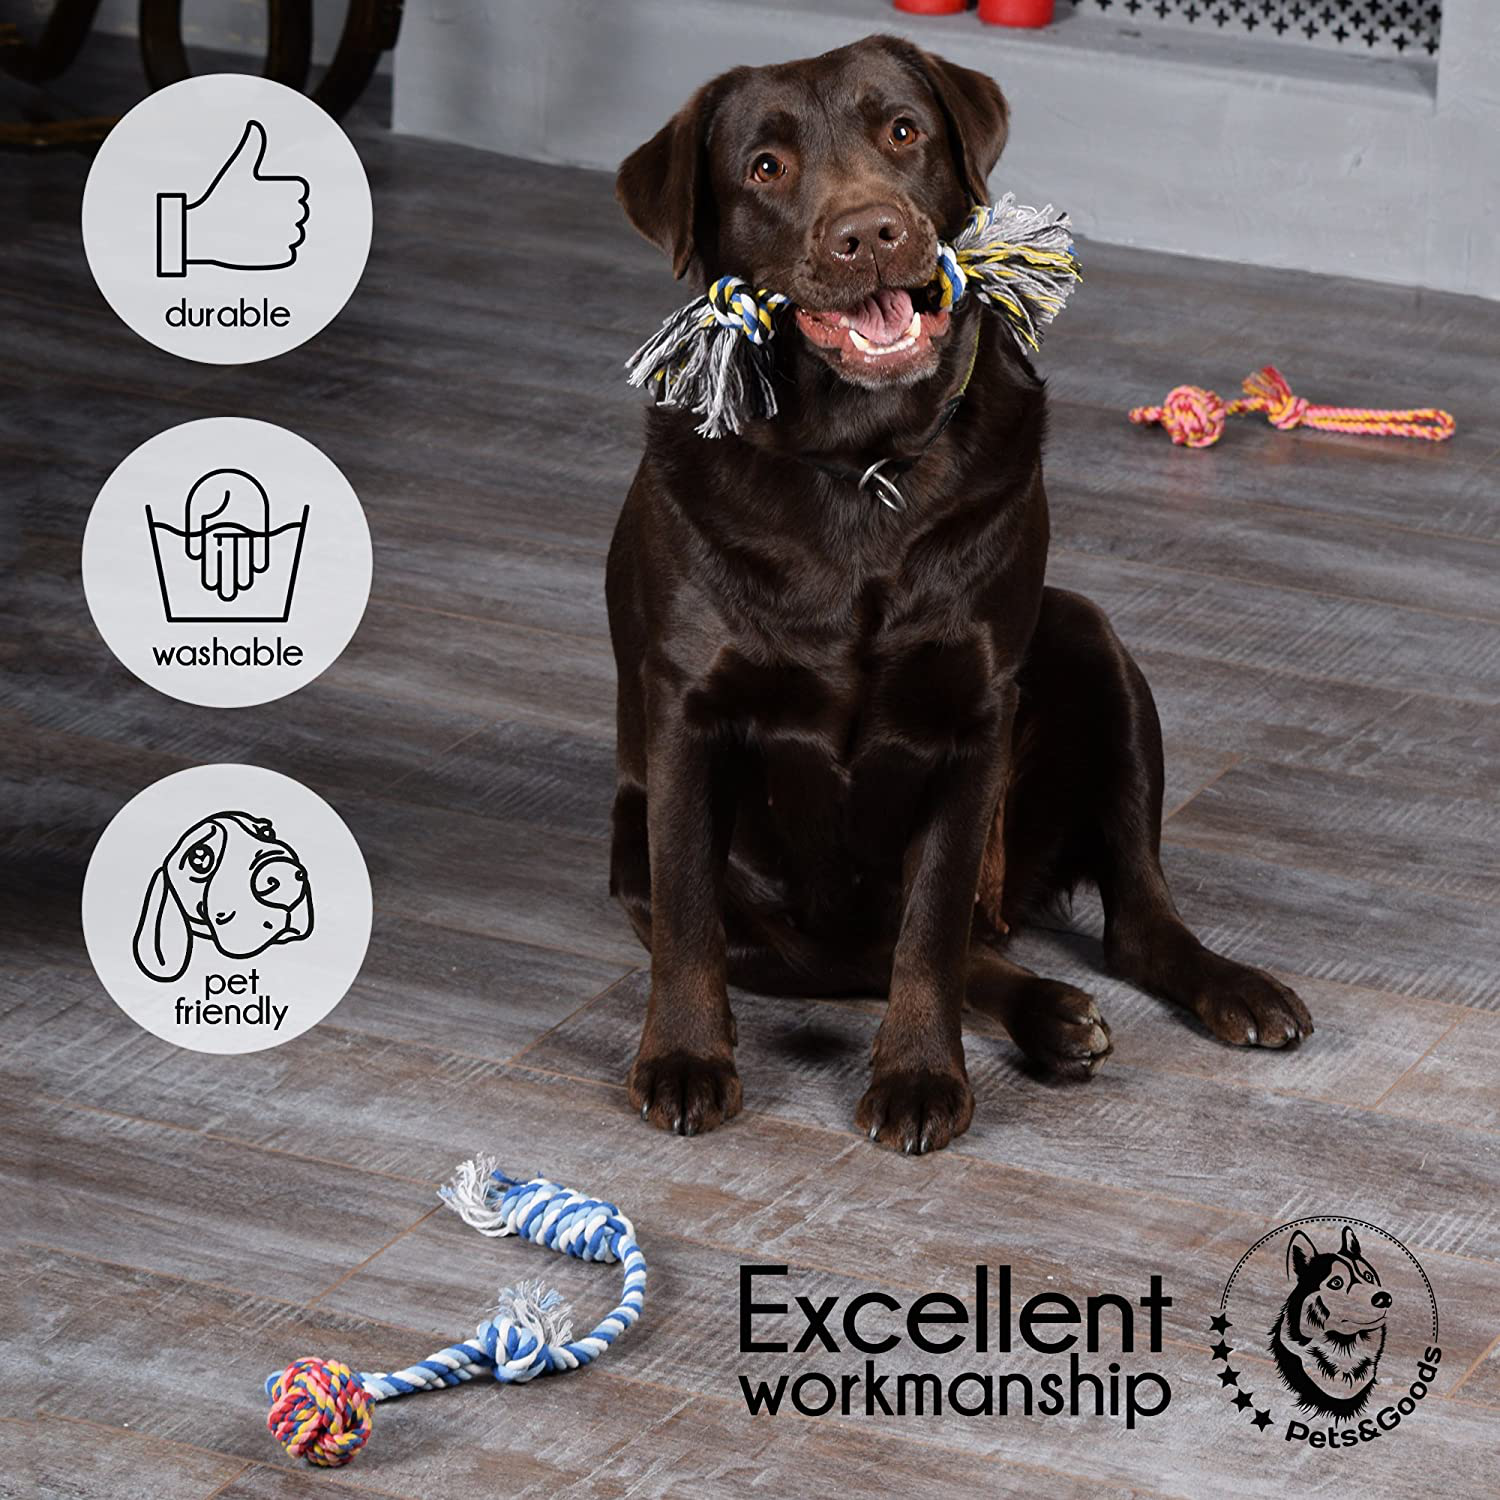 Dog Toys - Dog Chew Toys - Puppy Teething Toys- Puppy Chew Toys - Rope Dog Toy - Puppy Toys - Small Dog Toys - Chew Toys - Dog Toy Pack - Tug Toy - Dog Toy Set - Washable Cotton Rope for Dogs Animals & Pet Supplies > Pet Supplies > Dog Supplies > Dog Toys Pets&Goods   